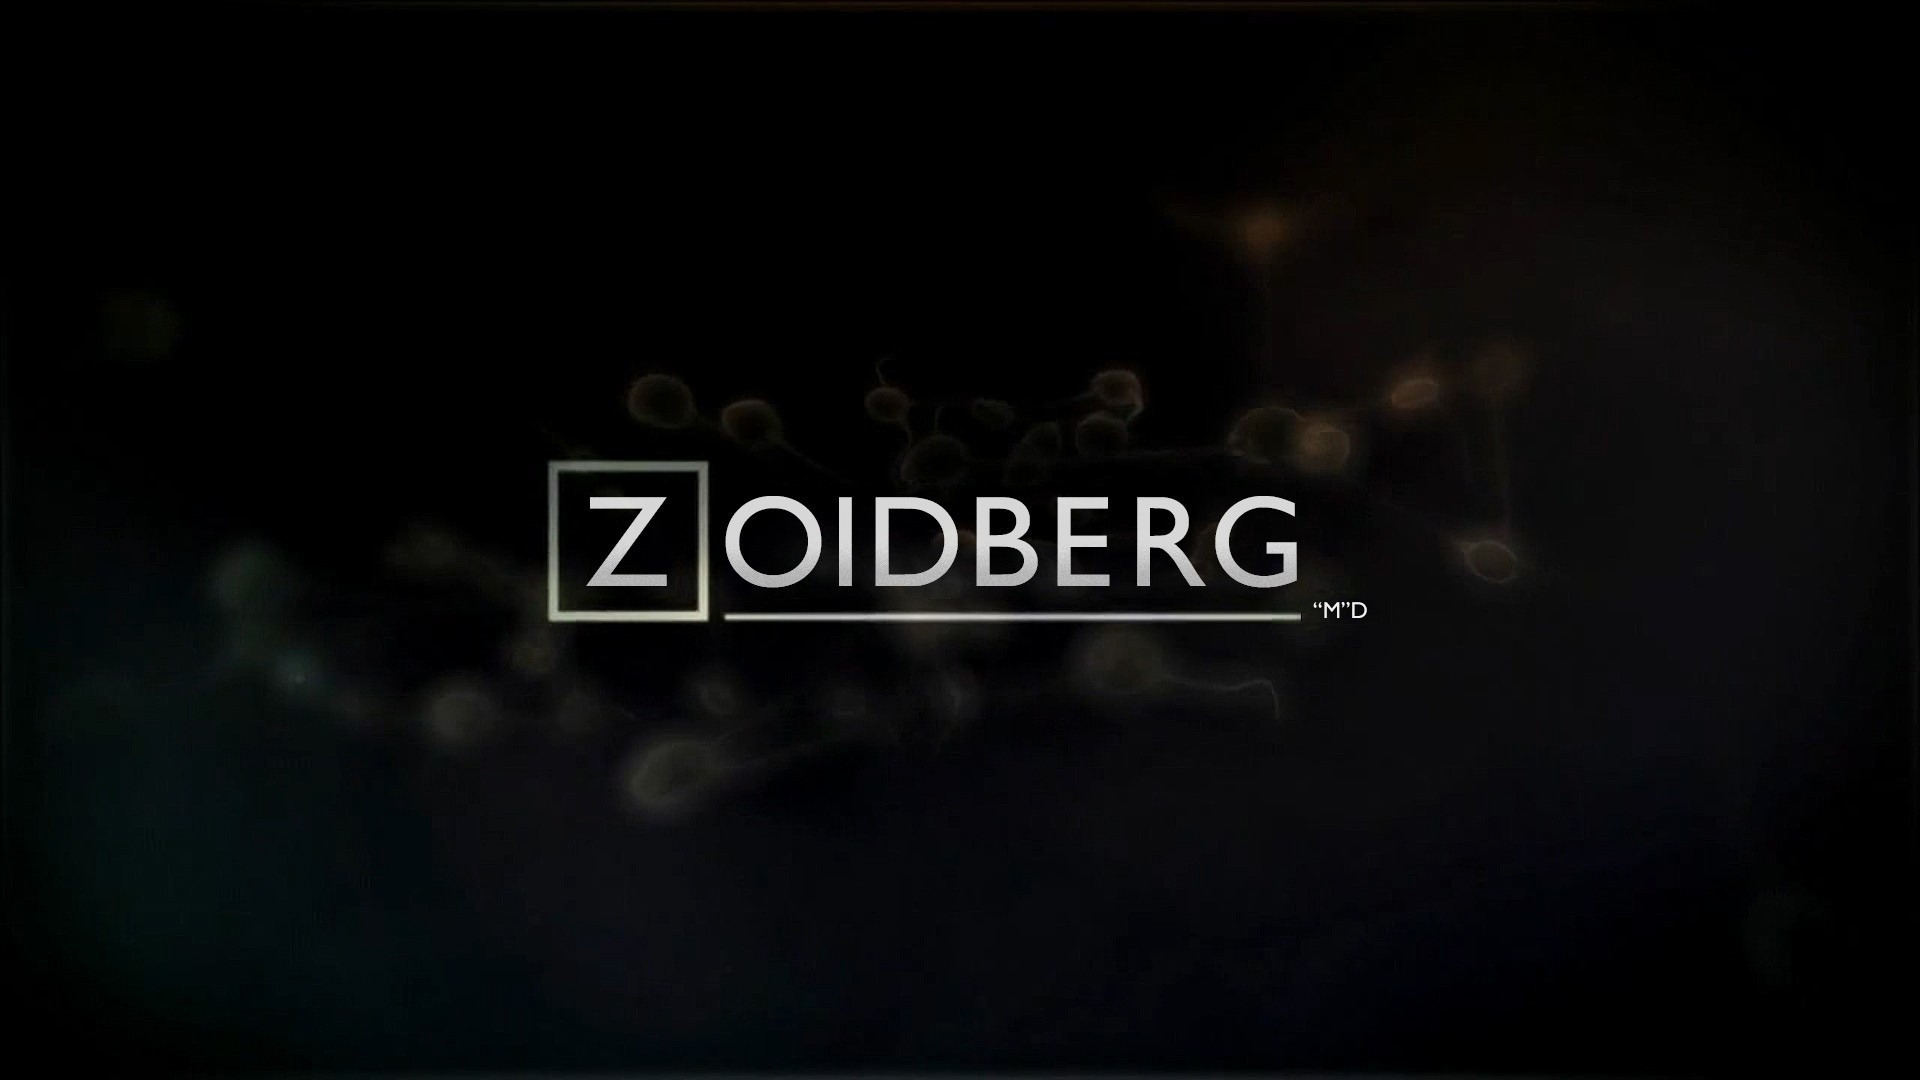 Zoidberg MD for 1920 x 1080 HDTV 1080p resolution